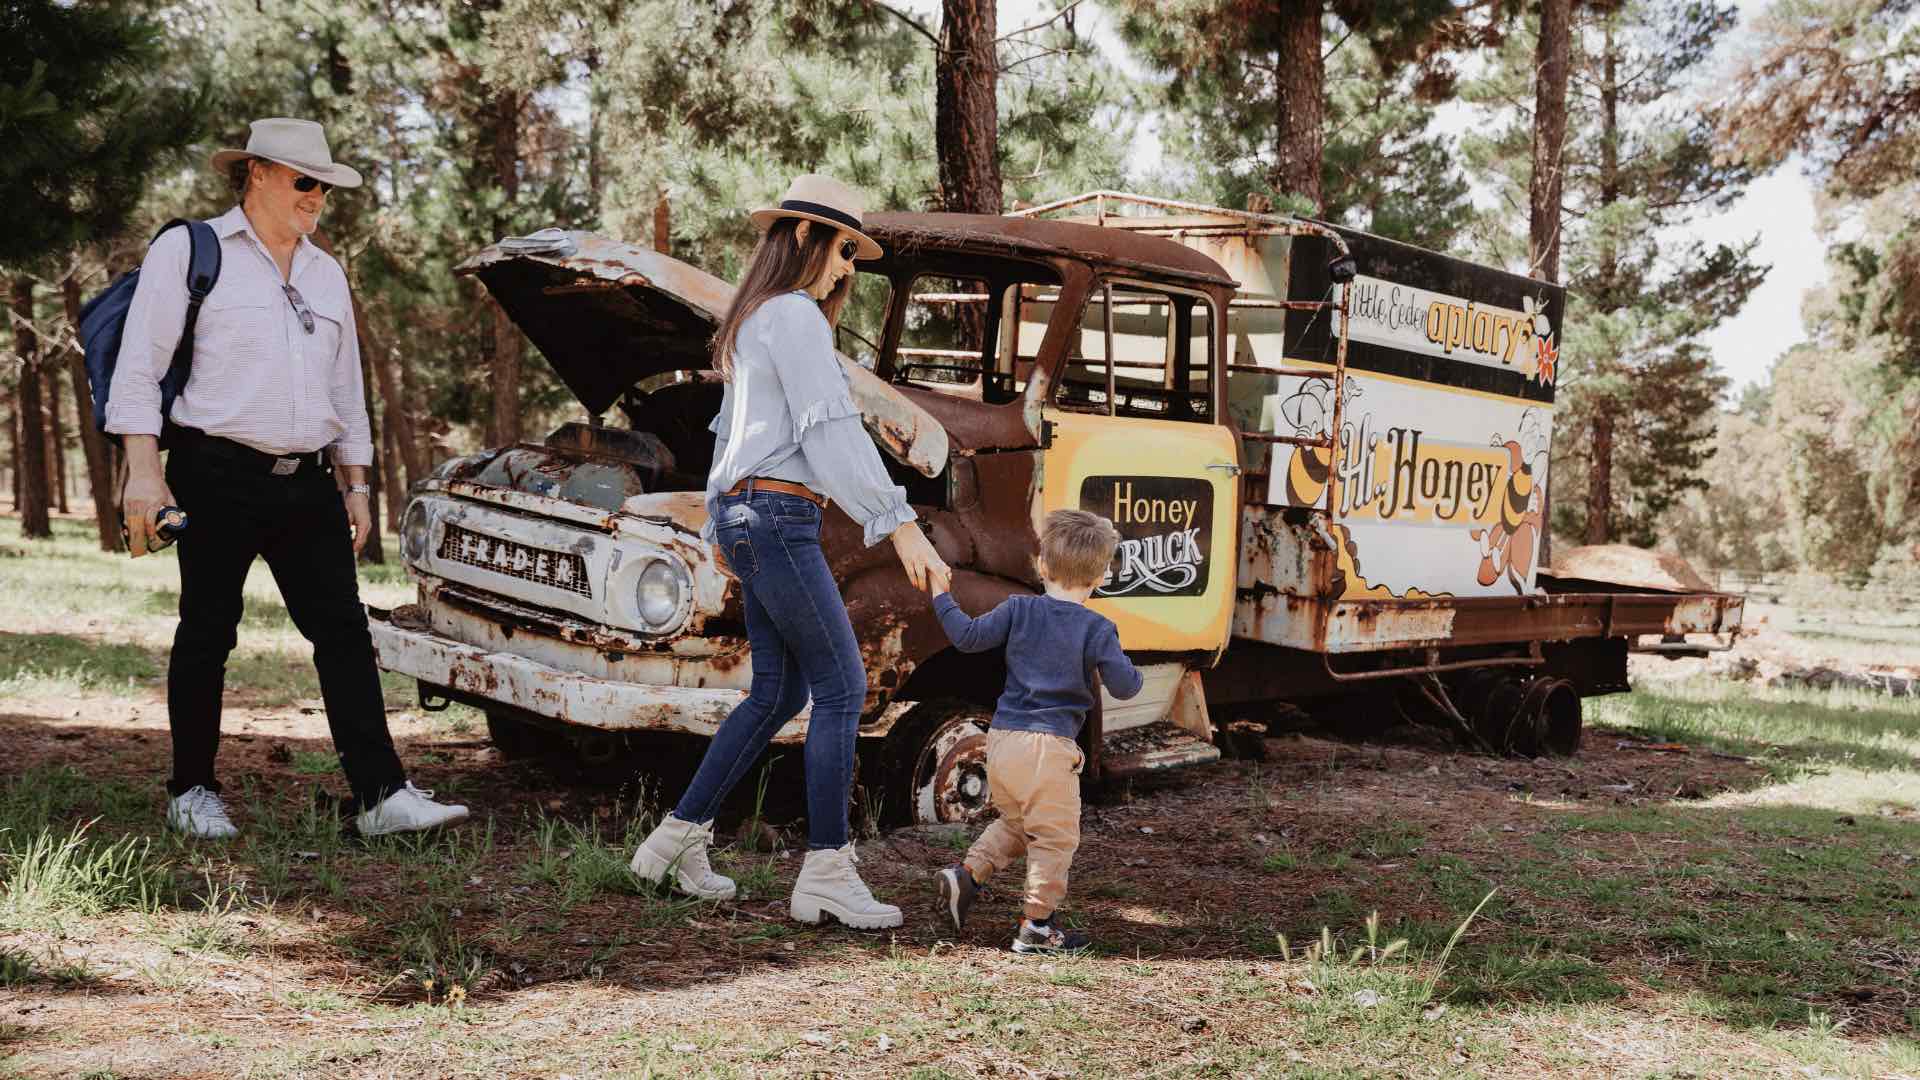 A family with a toddler in front of a honey truck.